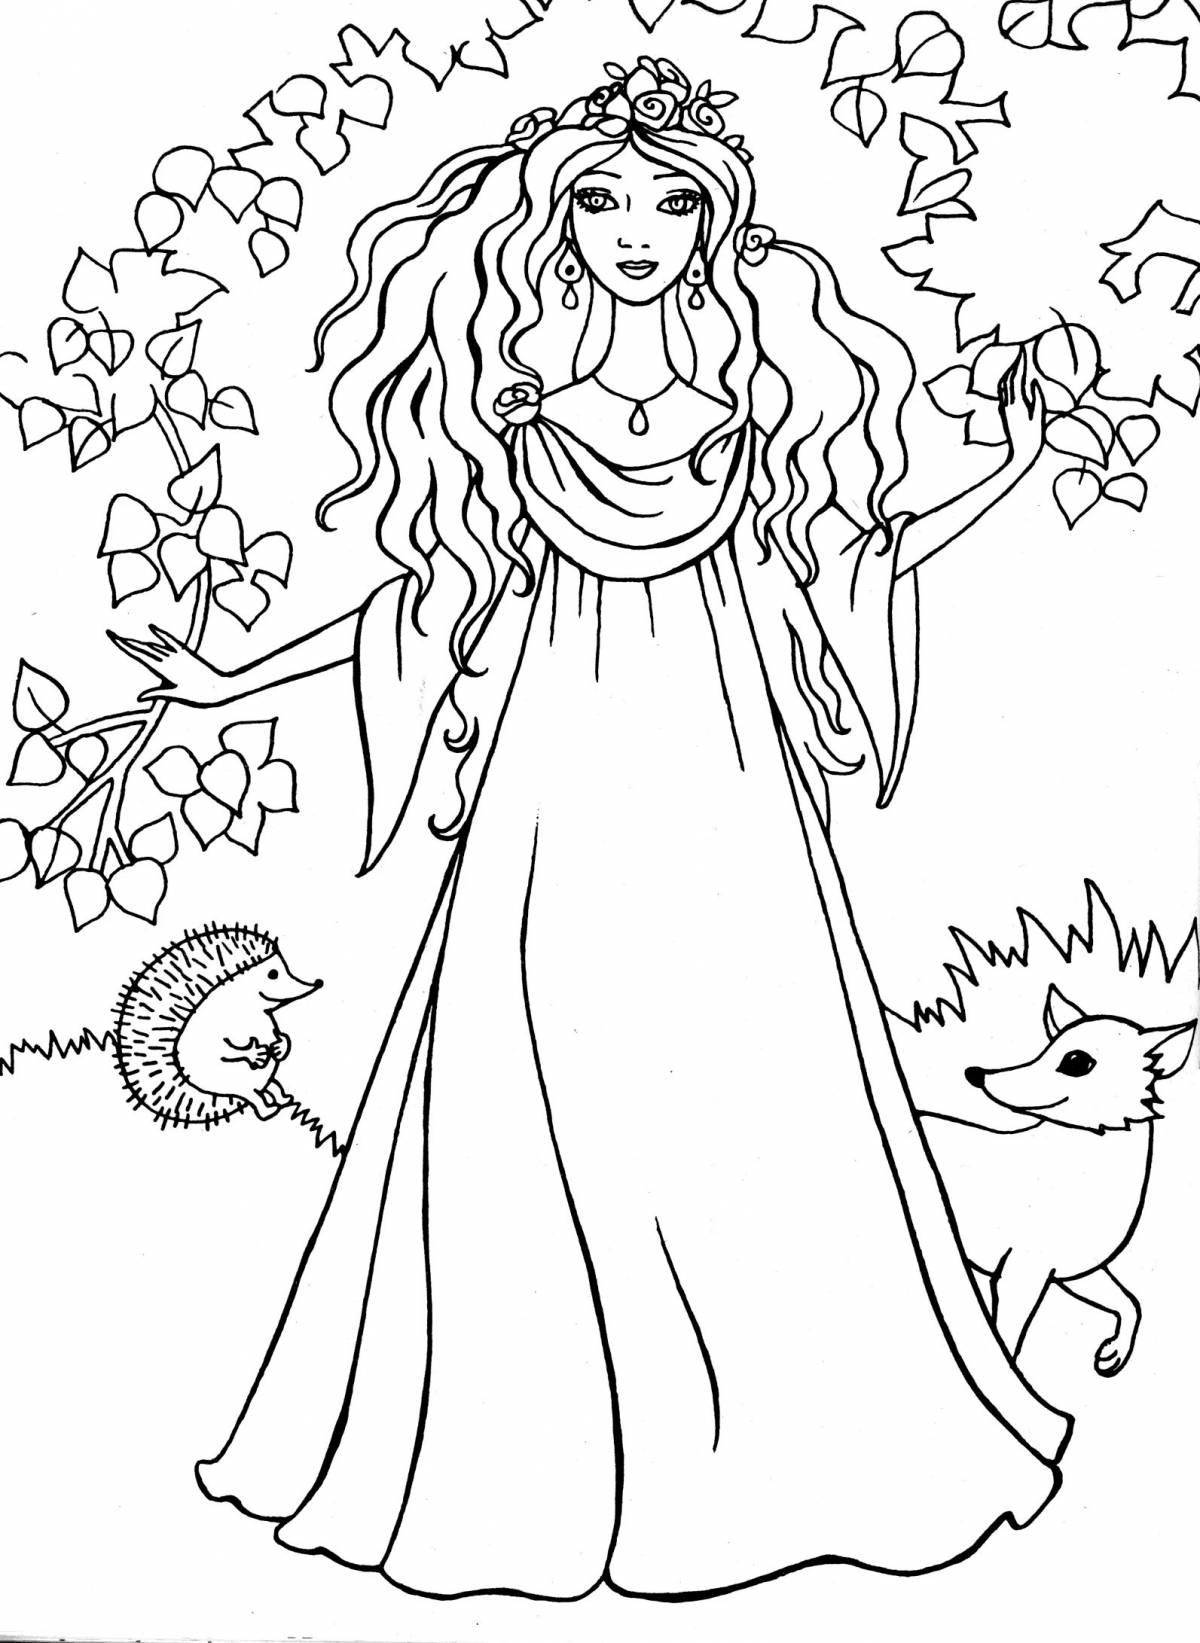 Live coloring girl in the forest